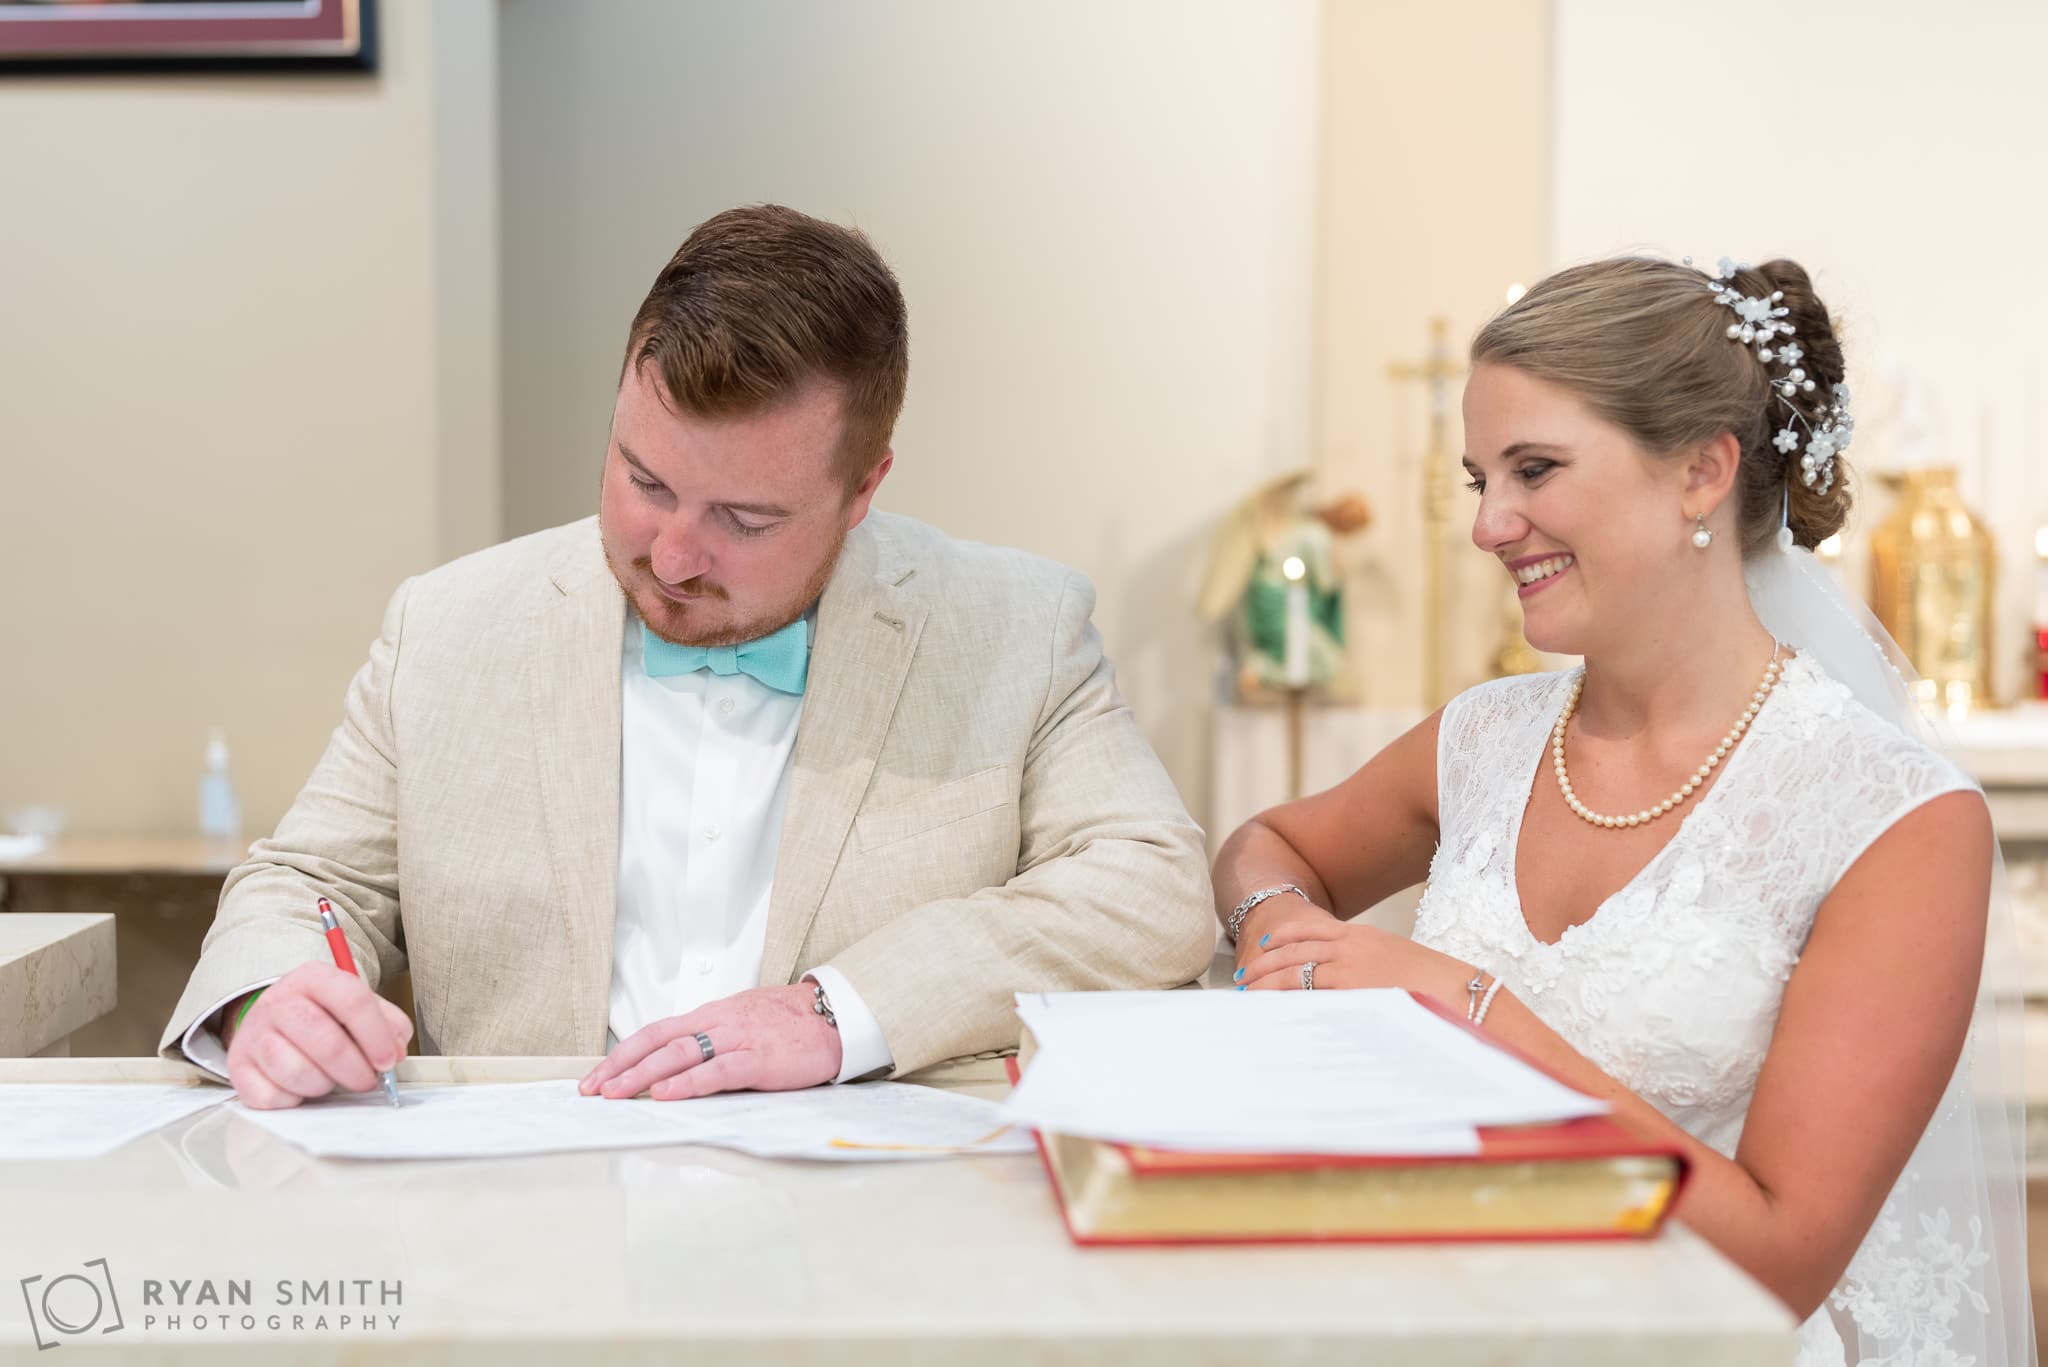 Signing the marriage license  - St. Michael's - Garden City, SC